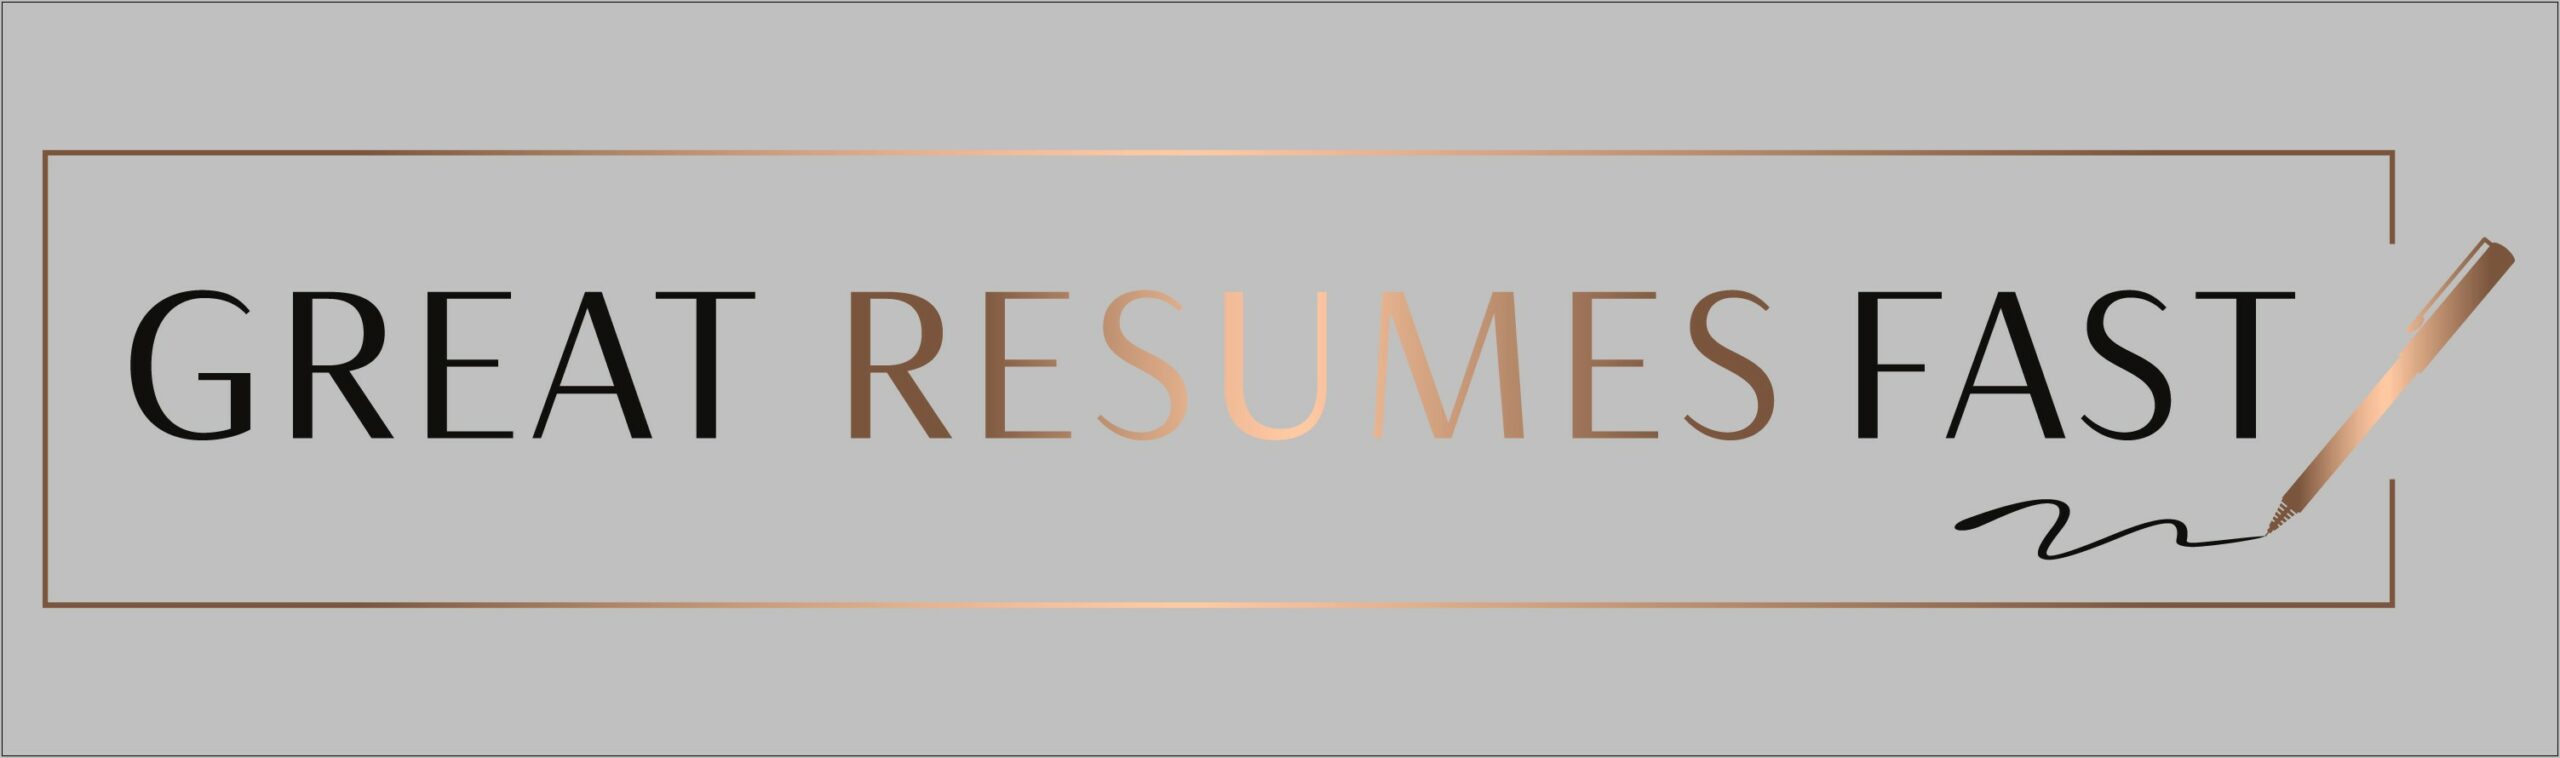 Resume Writing Services Sample Resumes